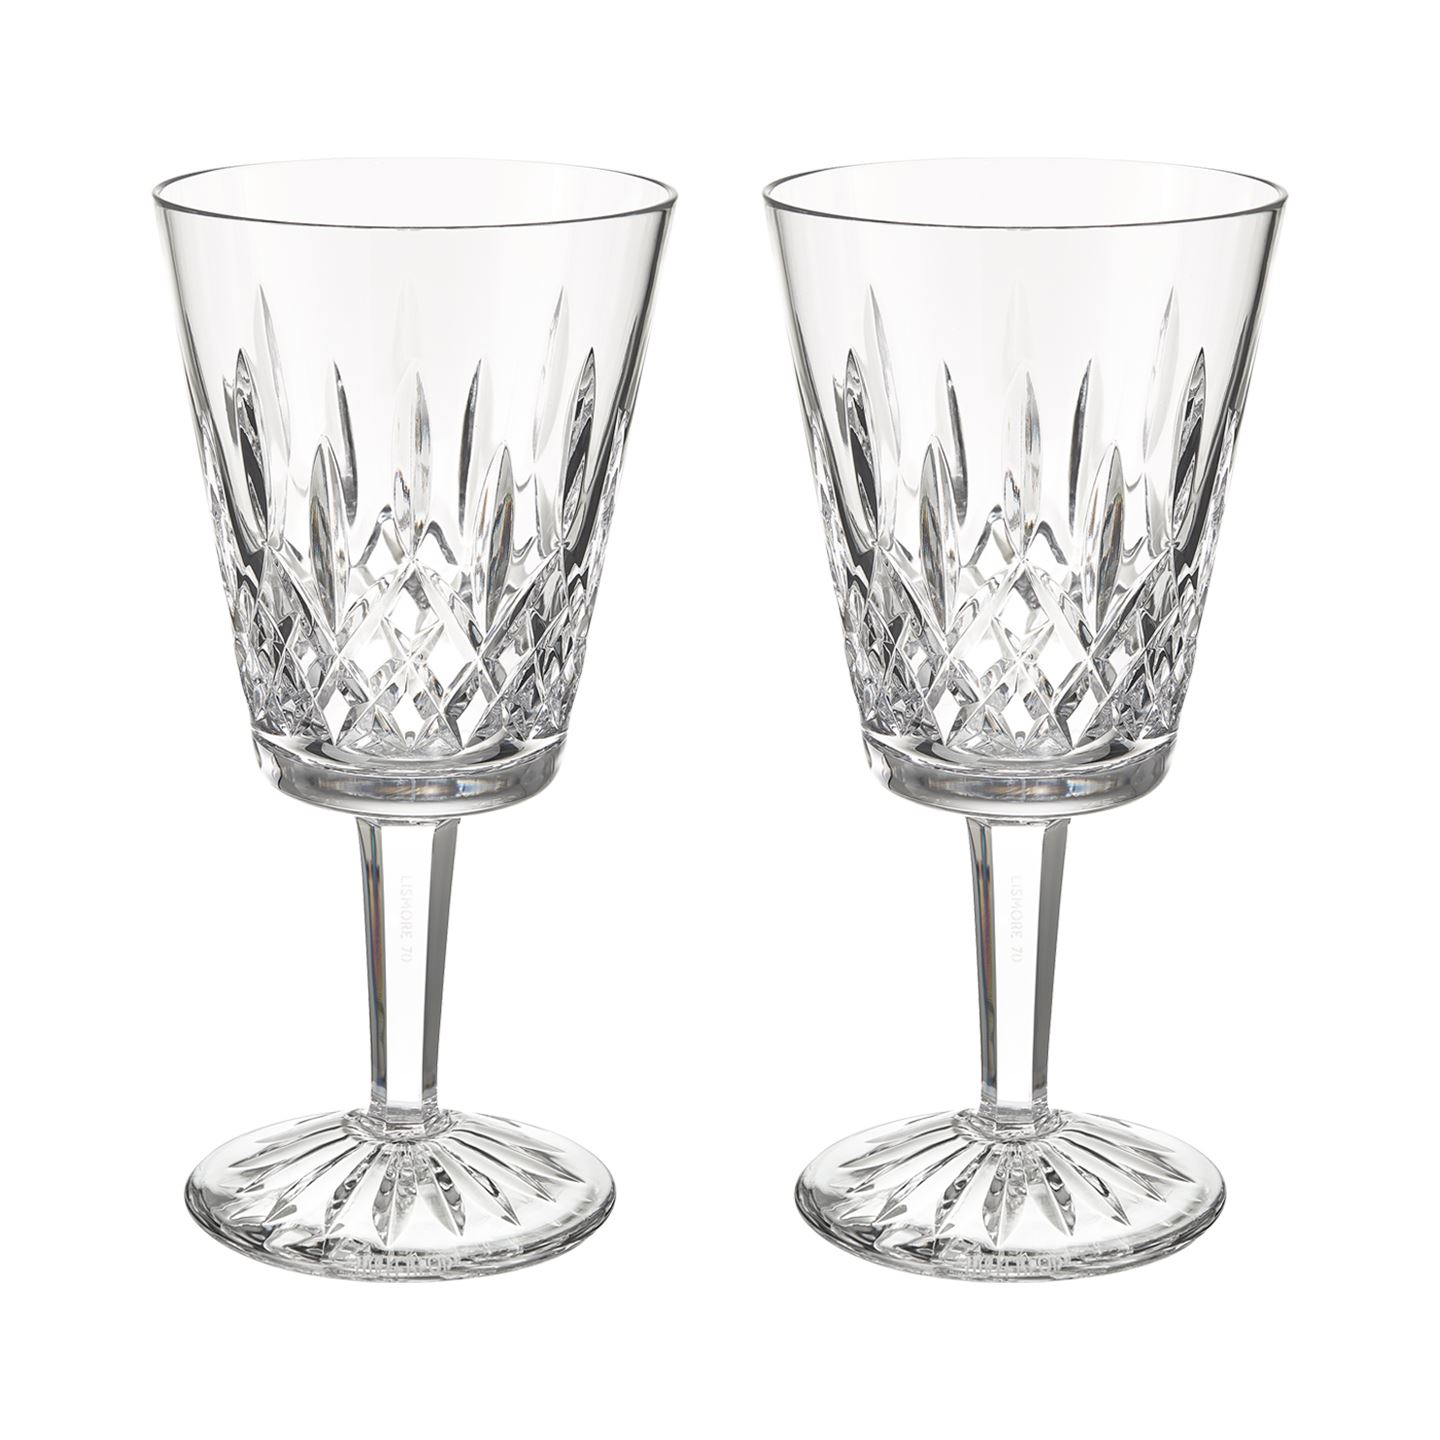 Guide to Wine Glasses - Types of Wine Glasses - Waterford®